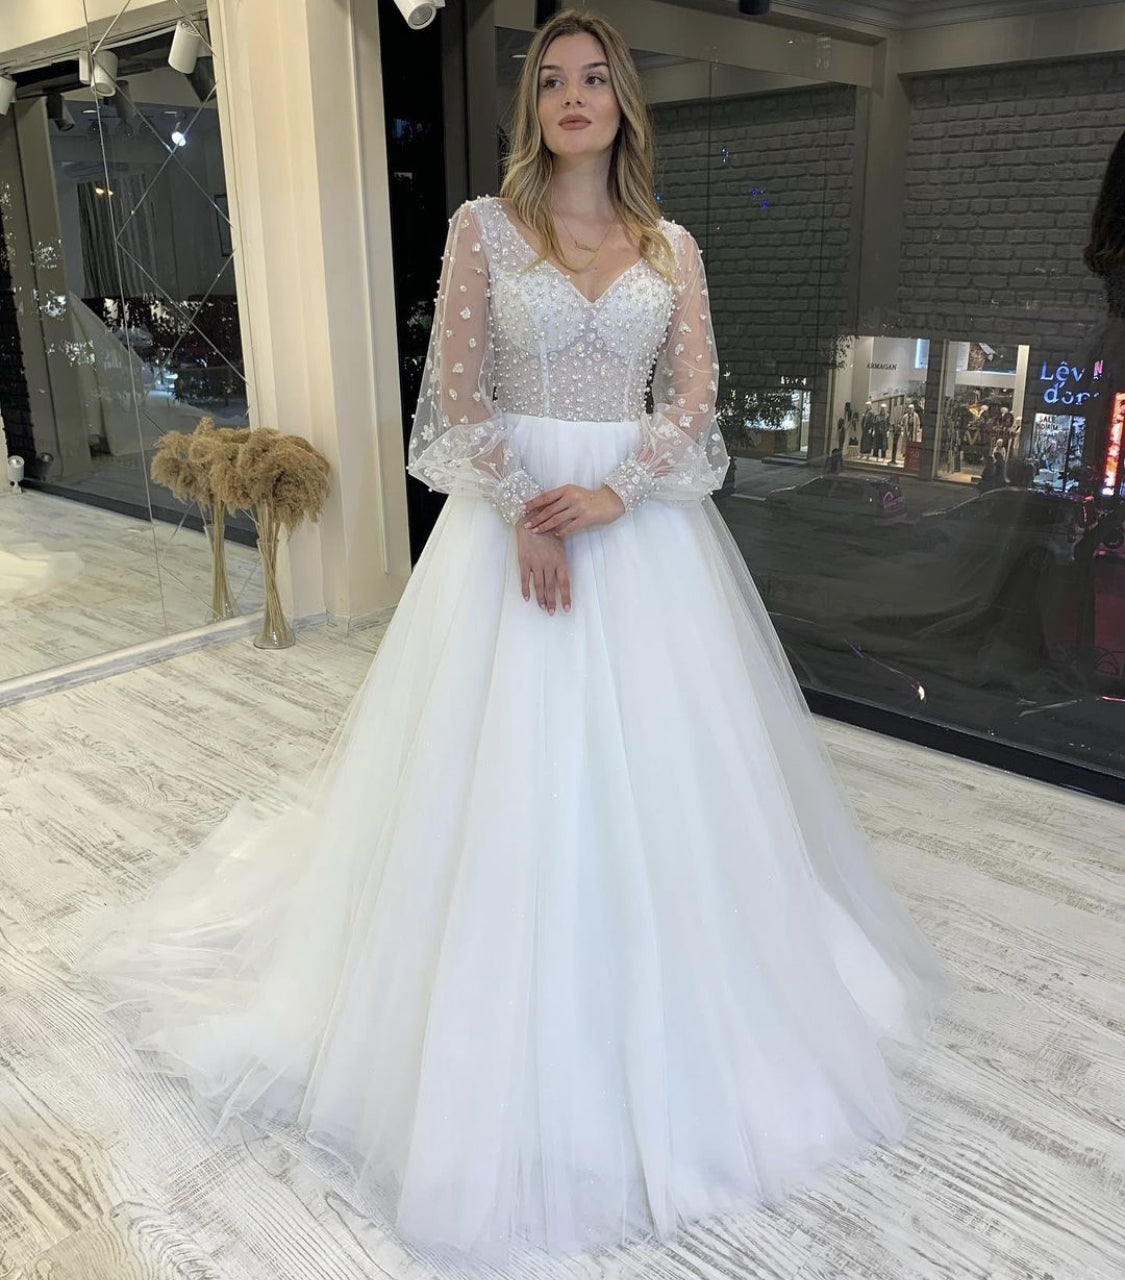 Handmade Beaded Top Wedding Dresses V Neck Long Sleeves Bridal Gowns Lace Up Back A Line Tulle Women Wear for Special Banquet,LW054